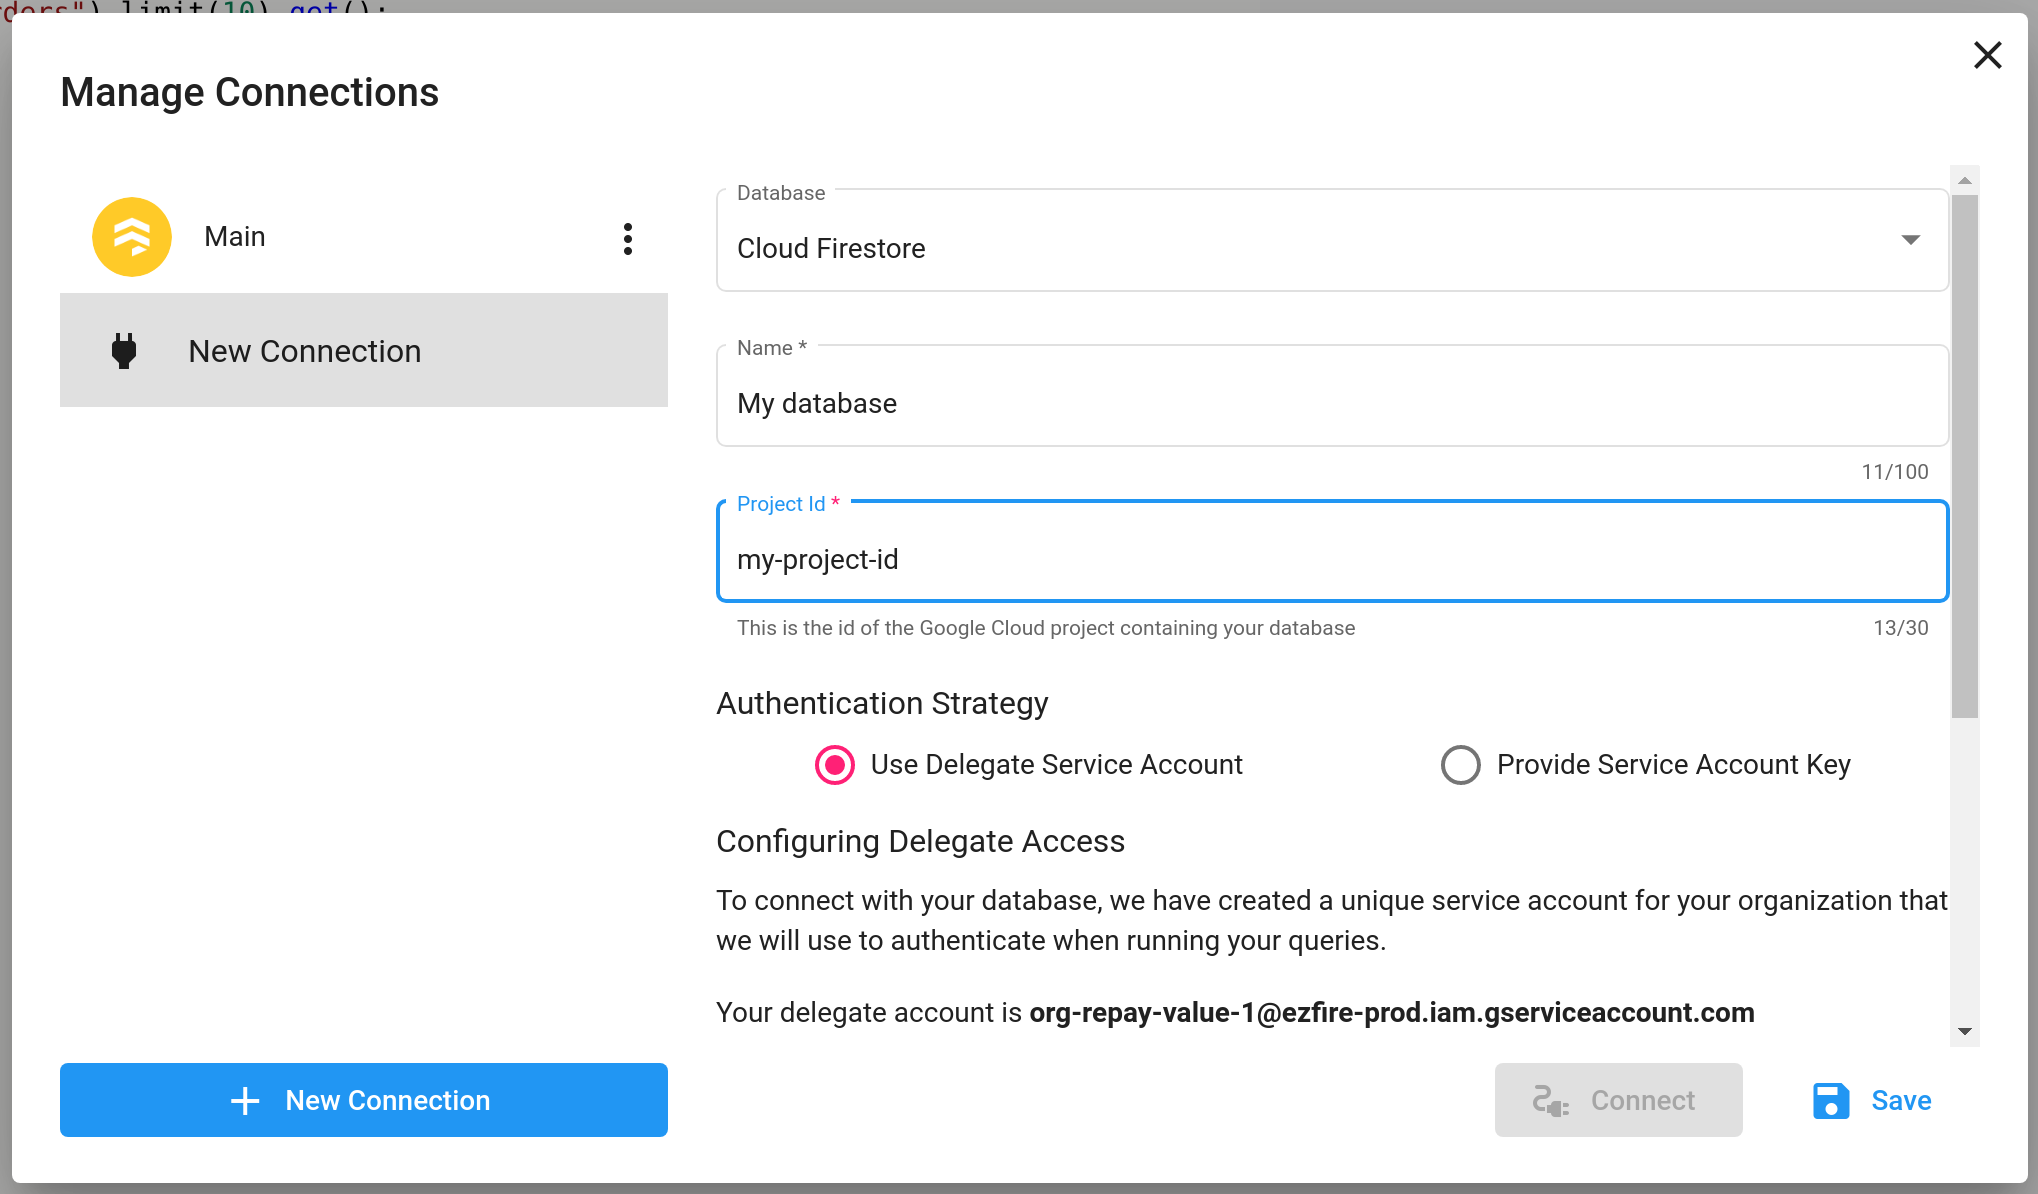 Connection using the delegate service account